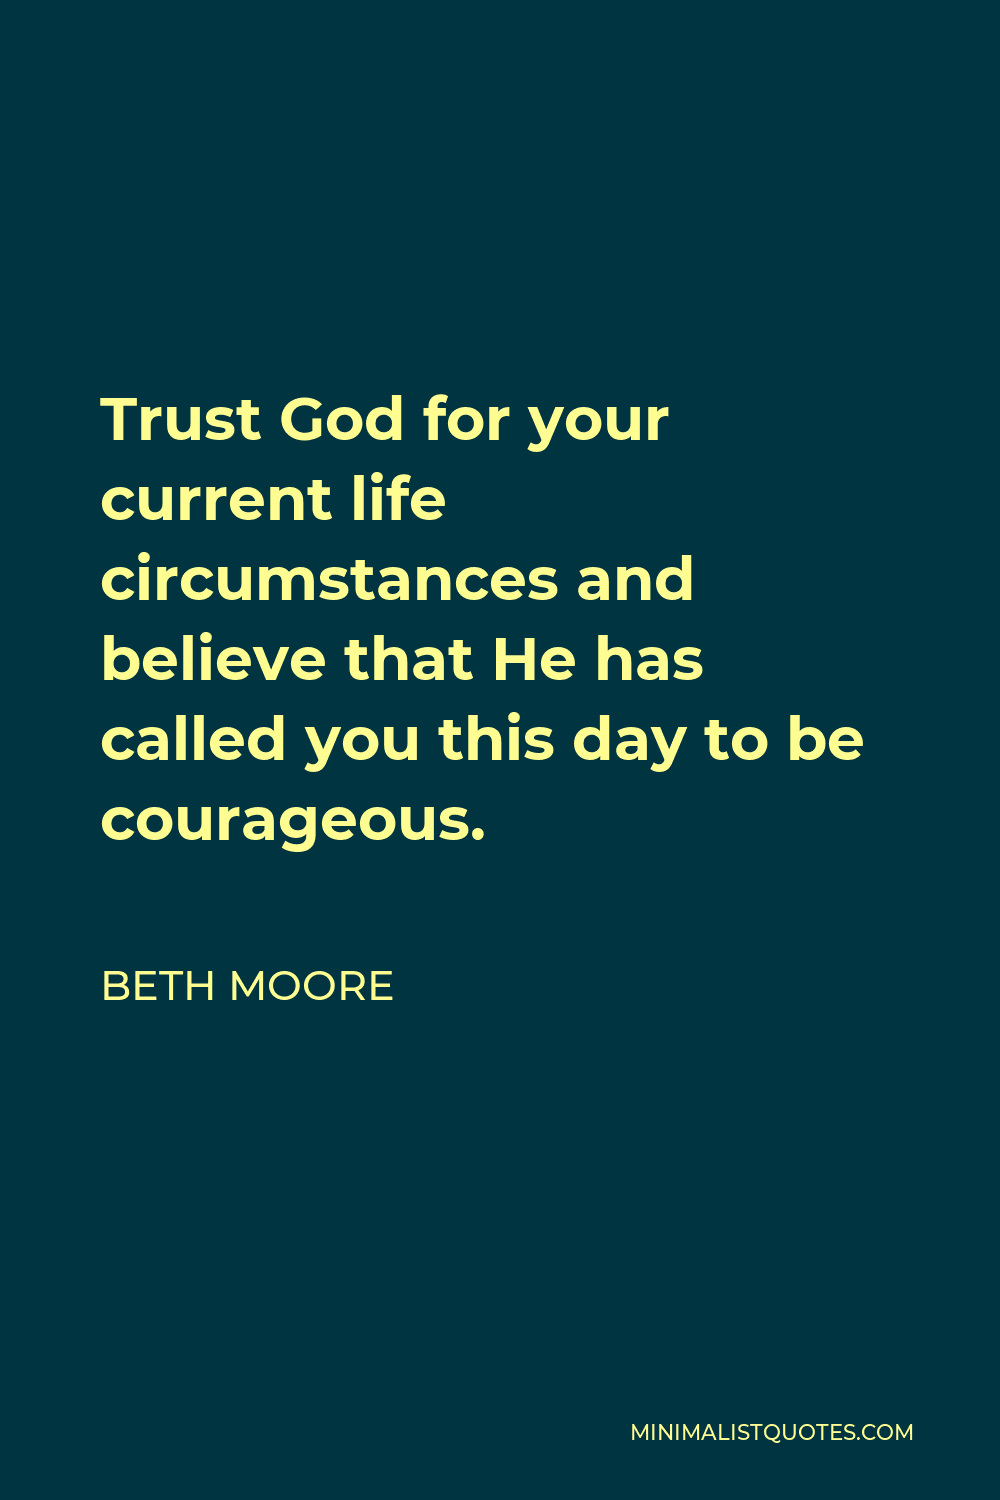 Beth Moore Quote - Trust God for your current life circumstances and believe that He has called you this day to be courageous.